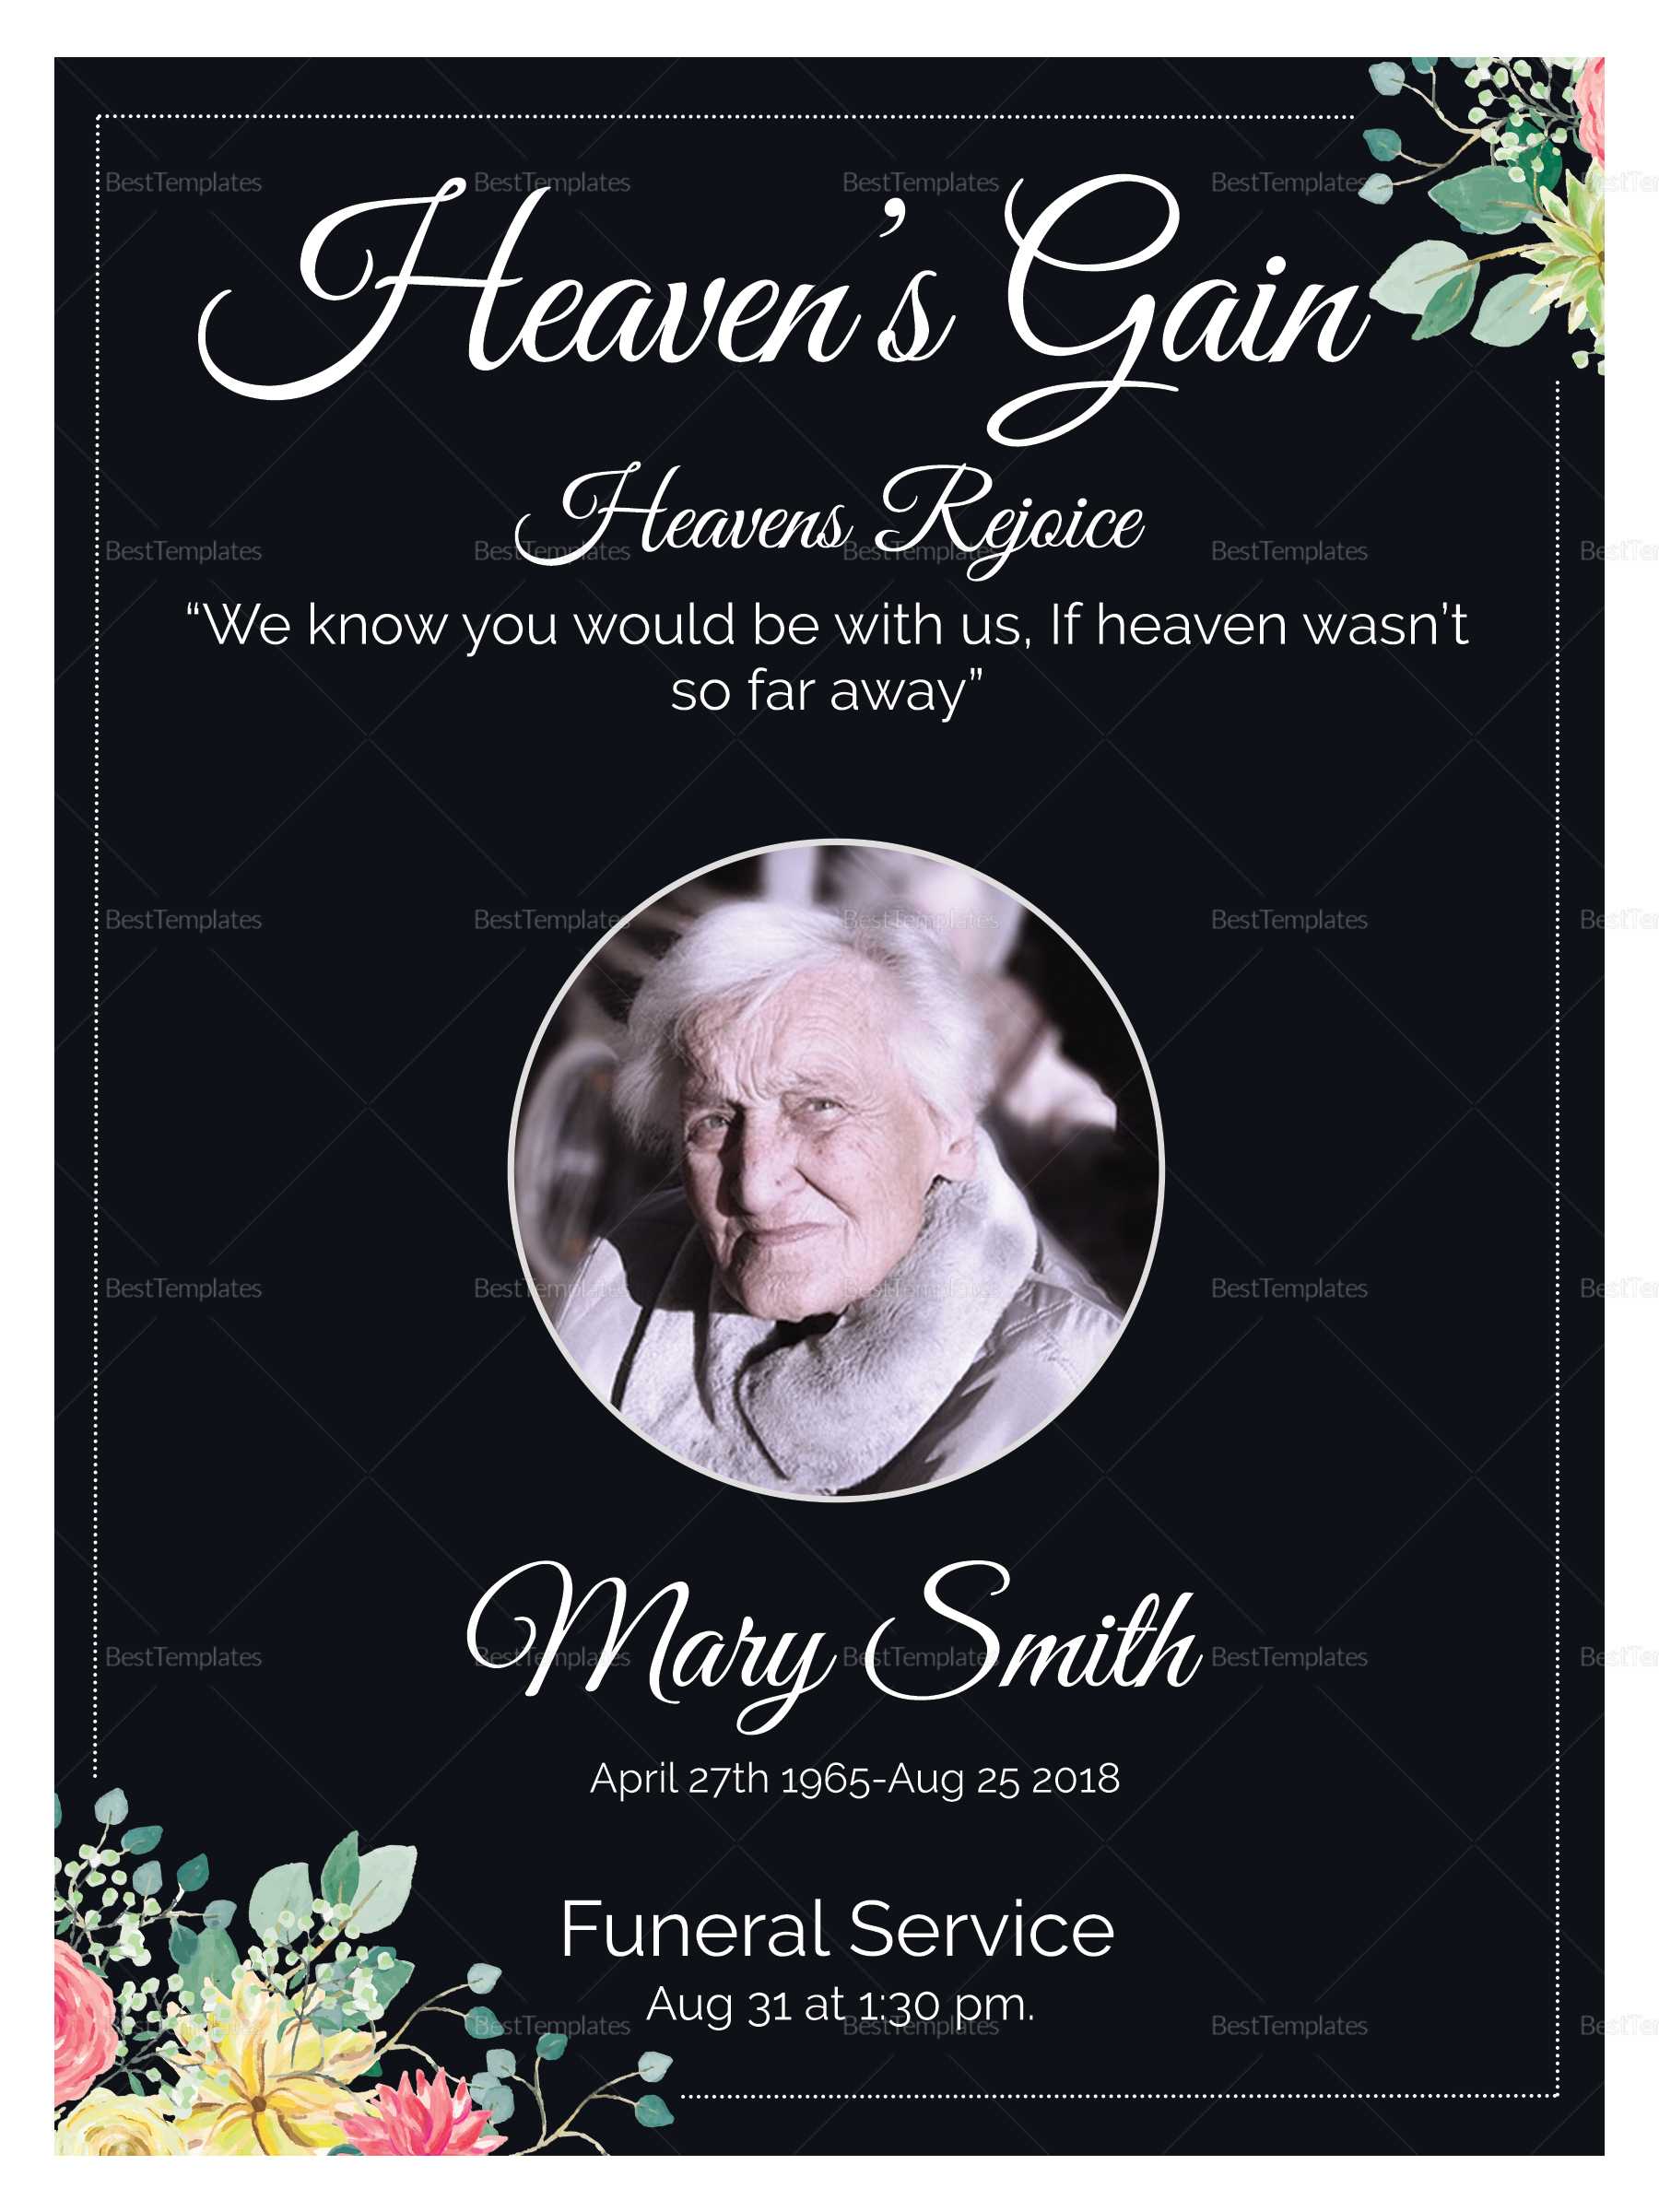 Eulogy Funeral Invitation Card Template Intended For Funeral Invitation Card Template